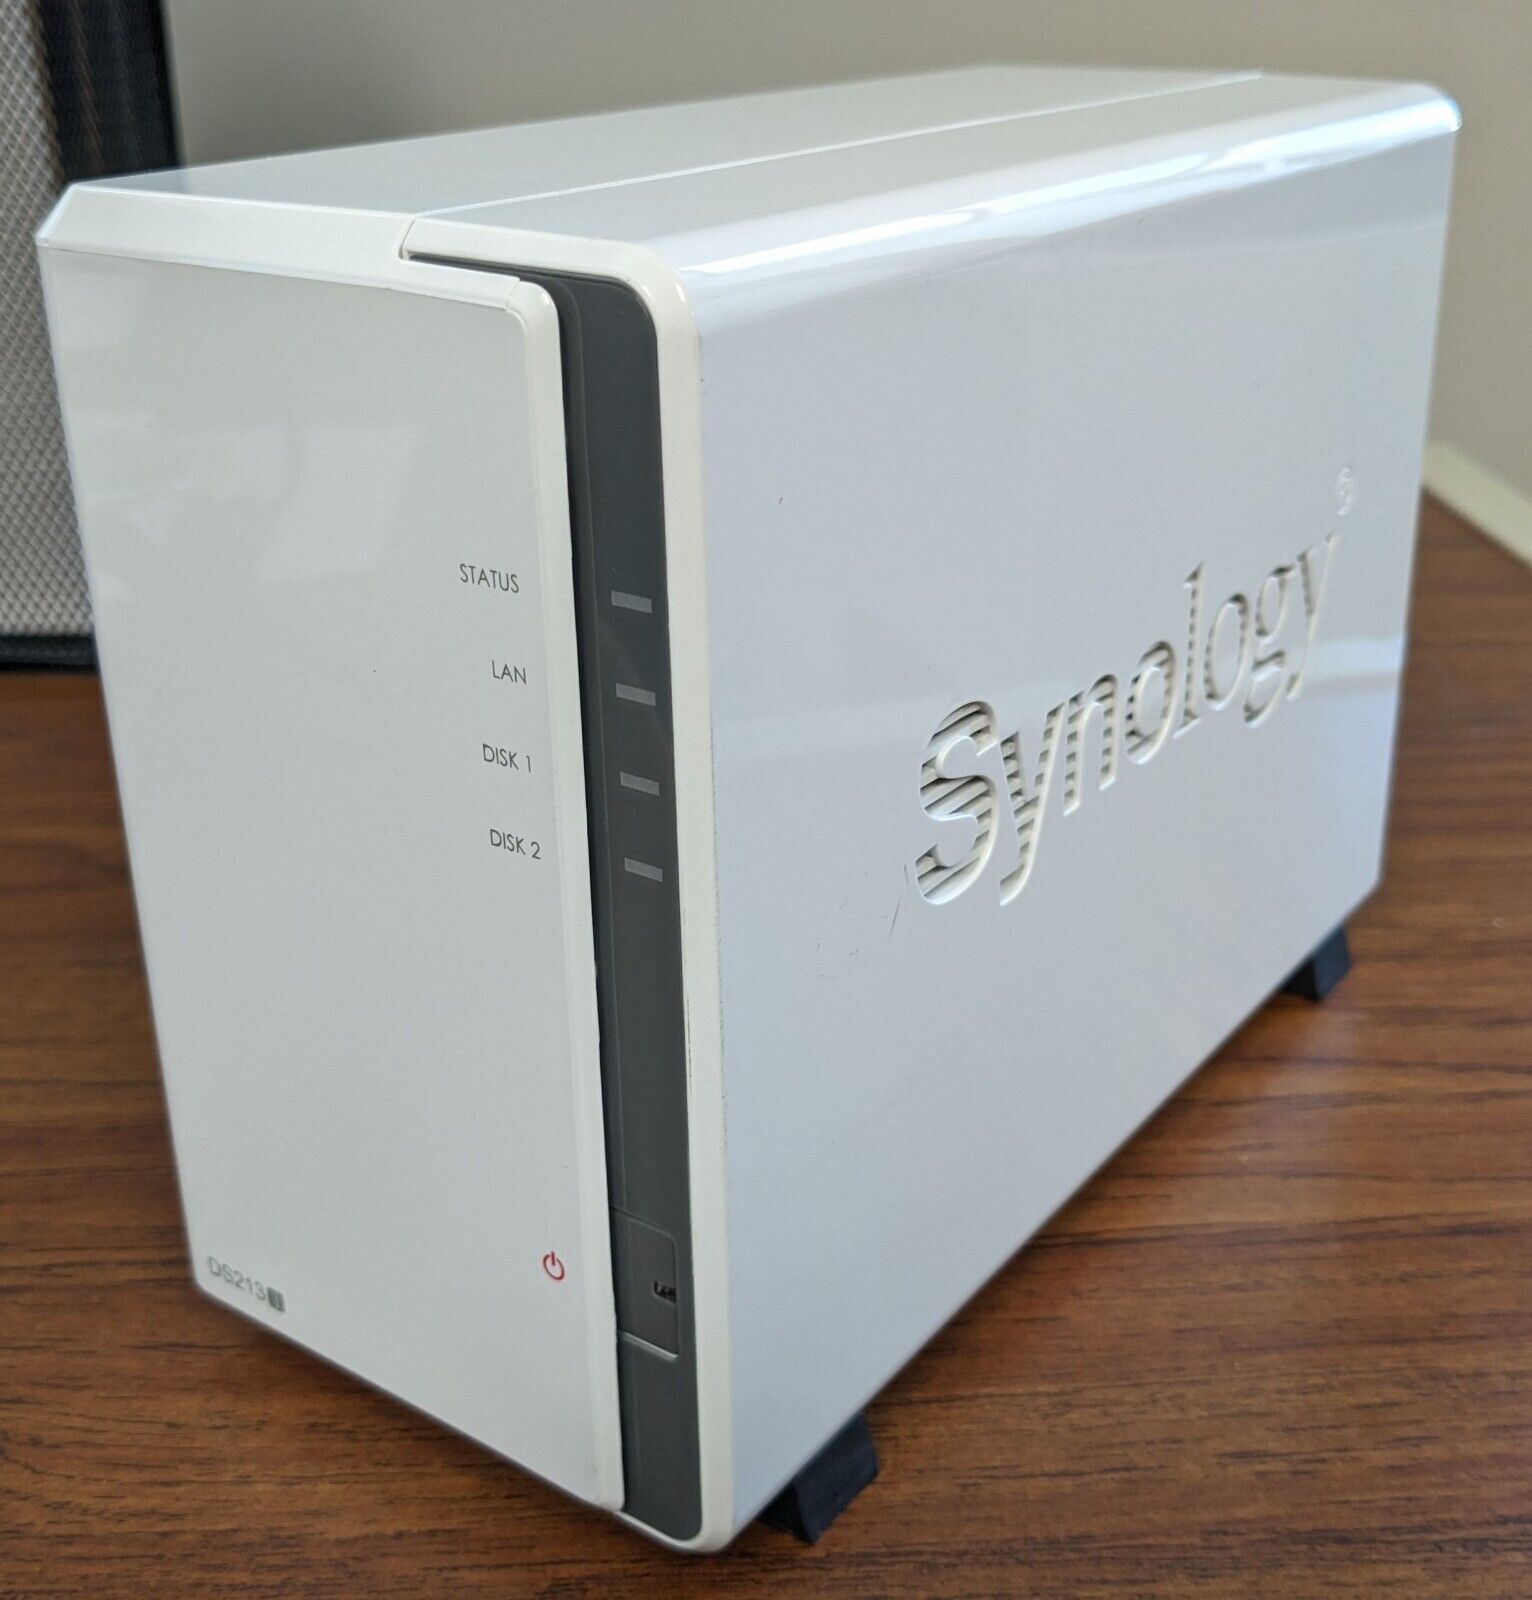 Synology DiskStation DS213j - 2 bay NAS, w/ 2 x 2TB hdd, Power cable included